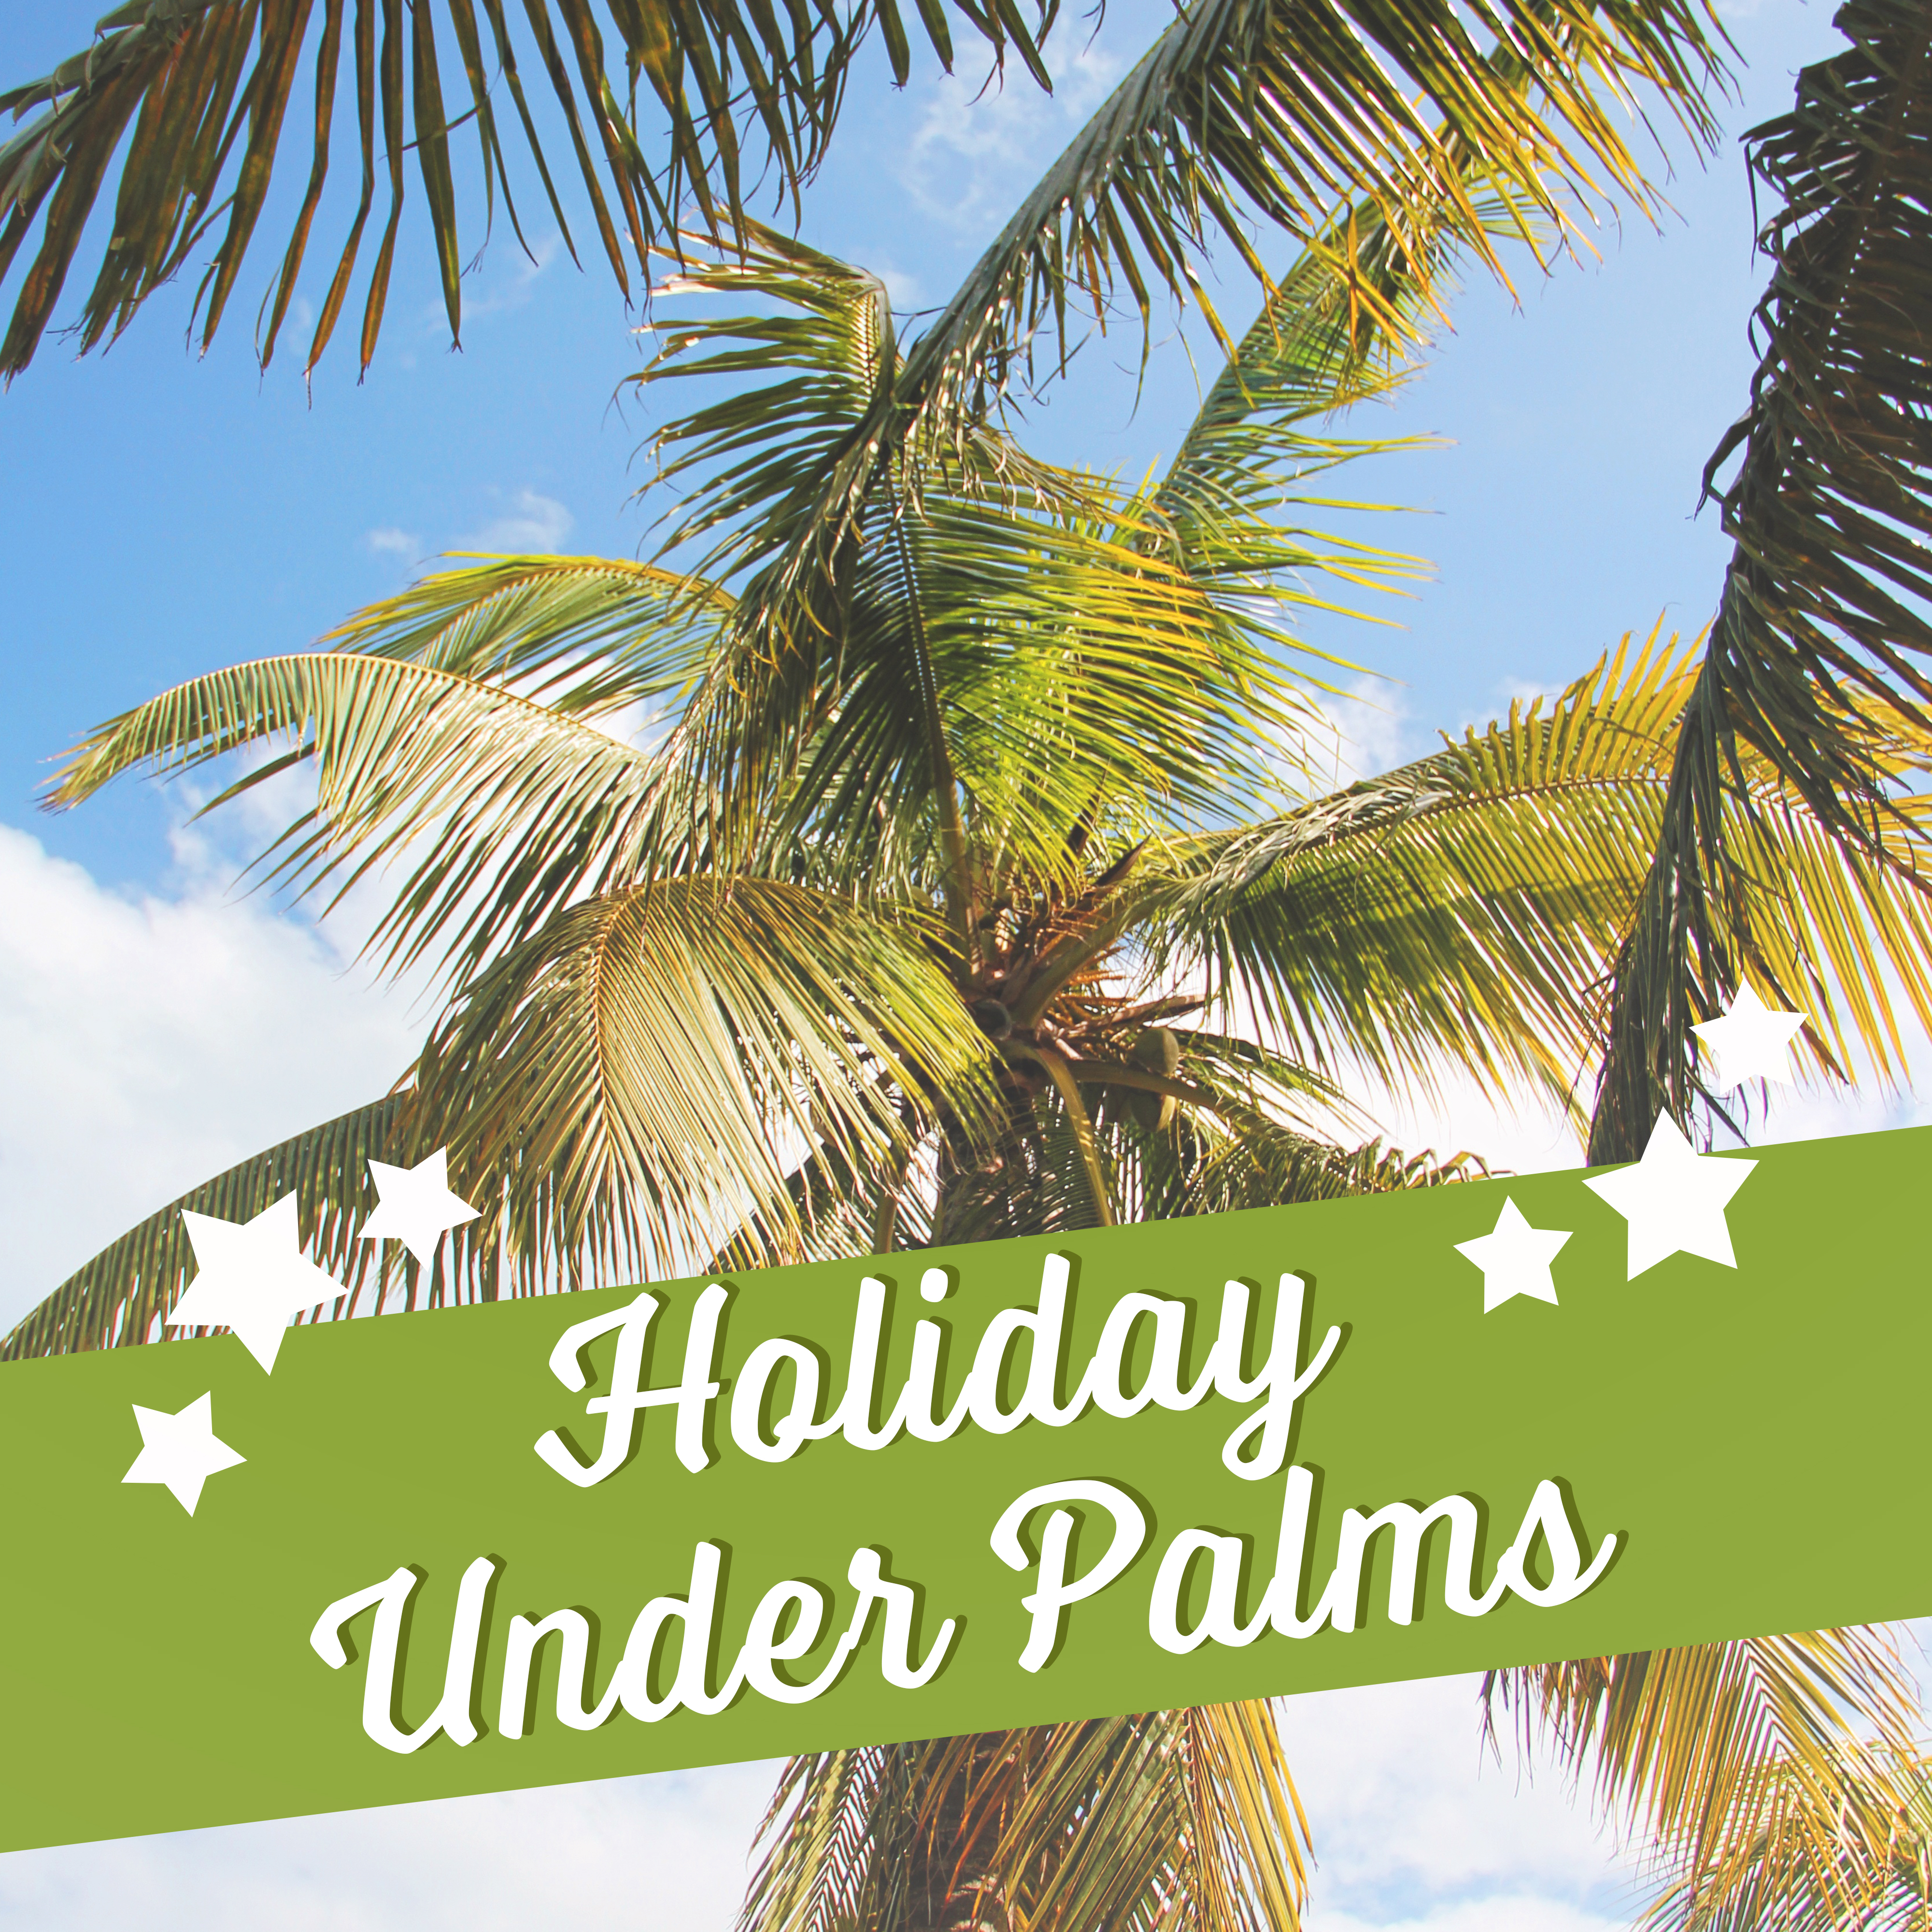 Holiday Under Palms  Chill Out Music, Beach Chill, Stress Free, Ocean Dreams, Holiday Songs, Cocktails  Drinks on the Beach, Summertime